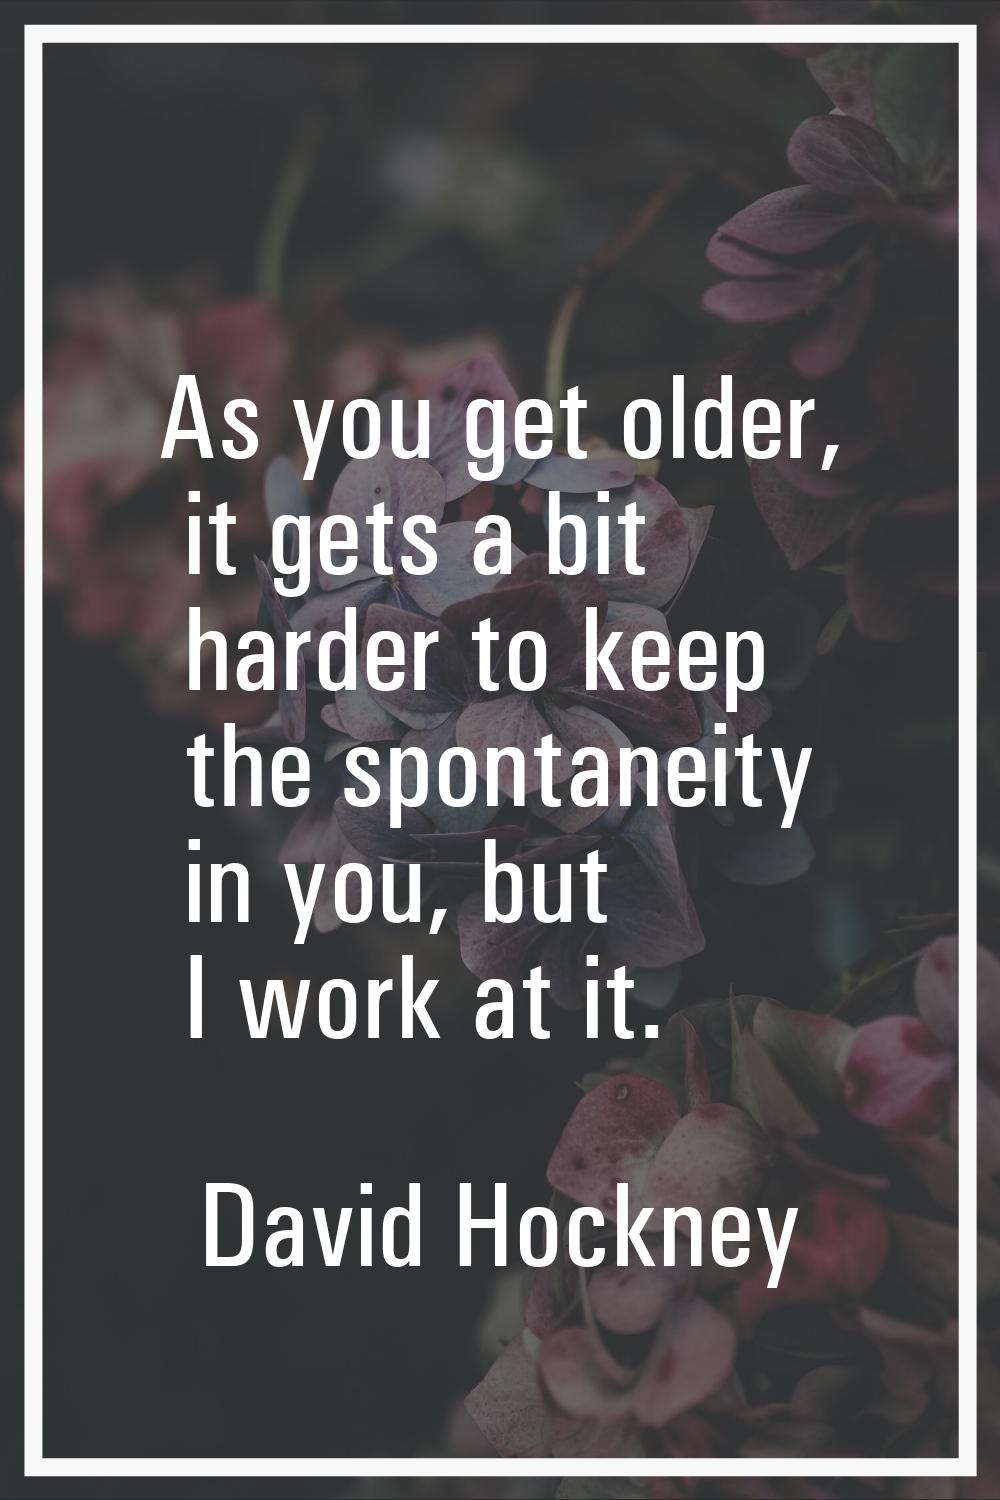 As you get older, it gets a bit harder to keep the spontaneity in you, but I work at it.